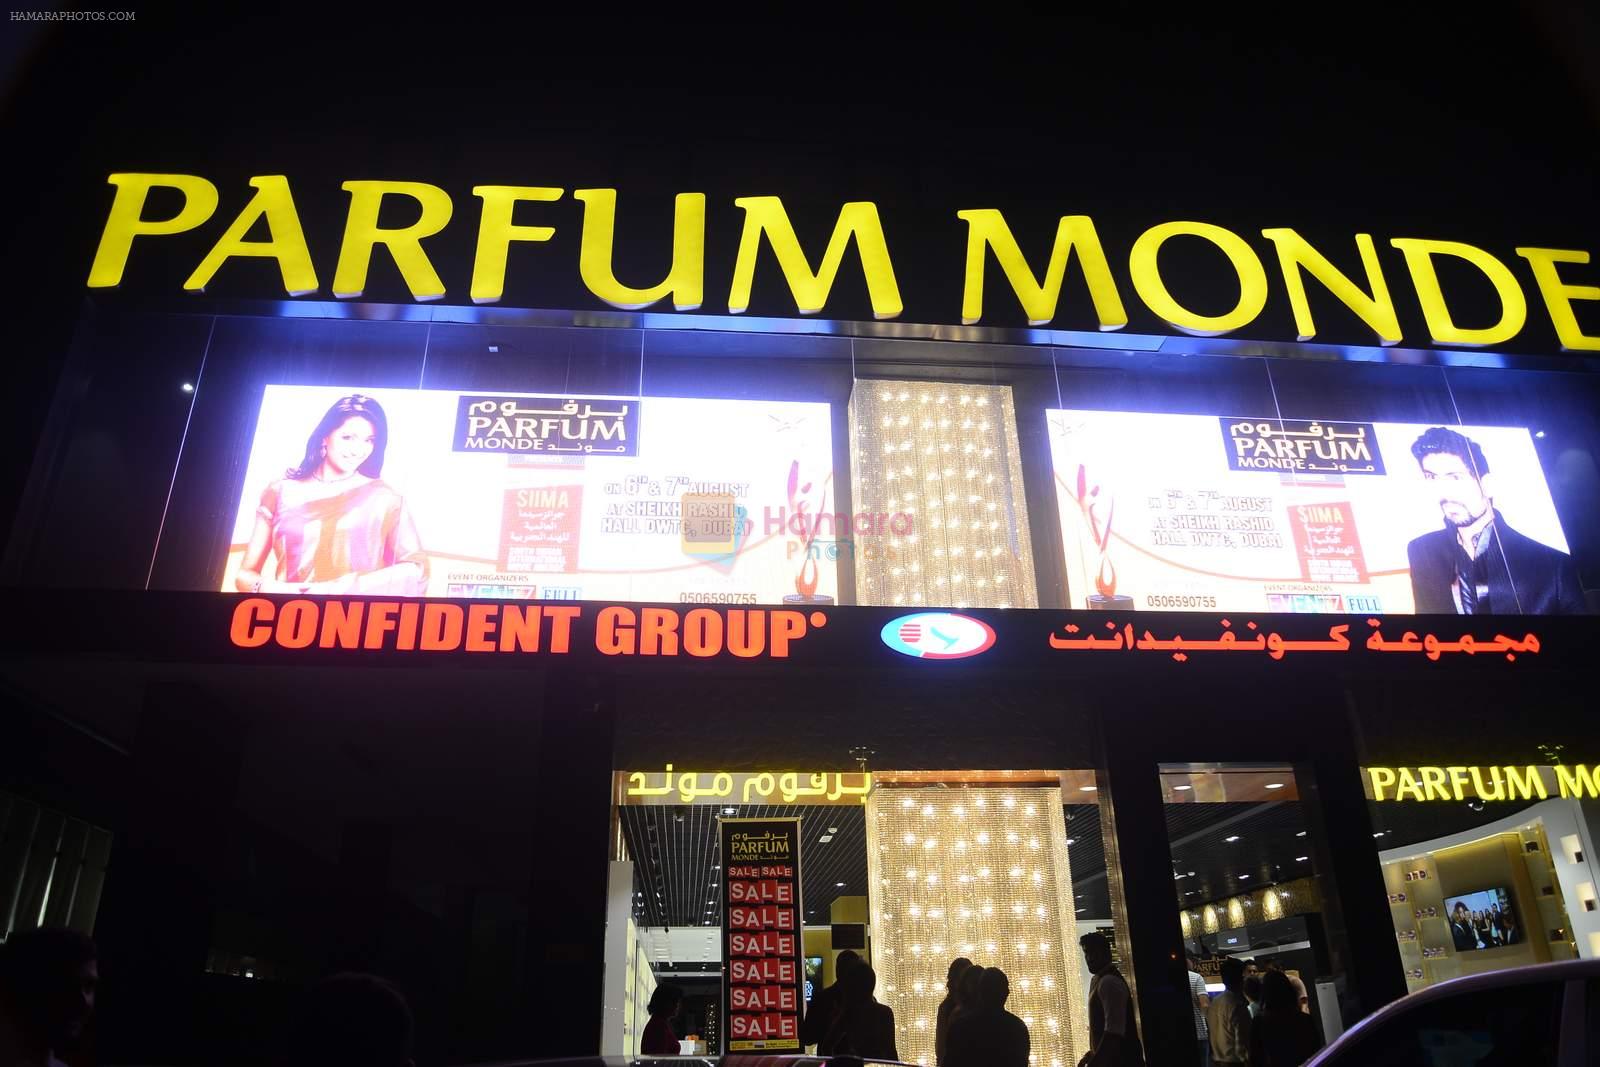 at the launch of Parfum Monde Store on 5th Aug 2015